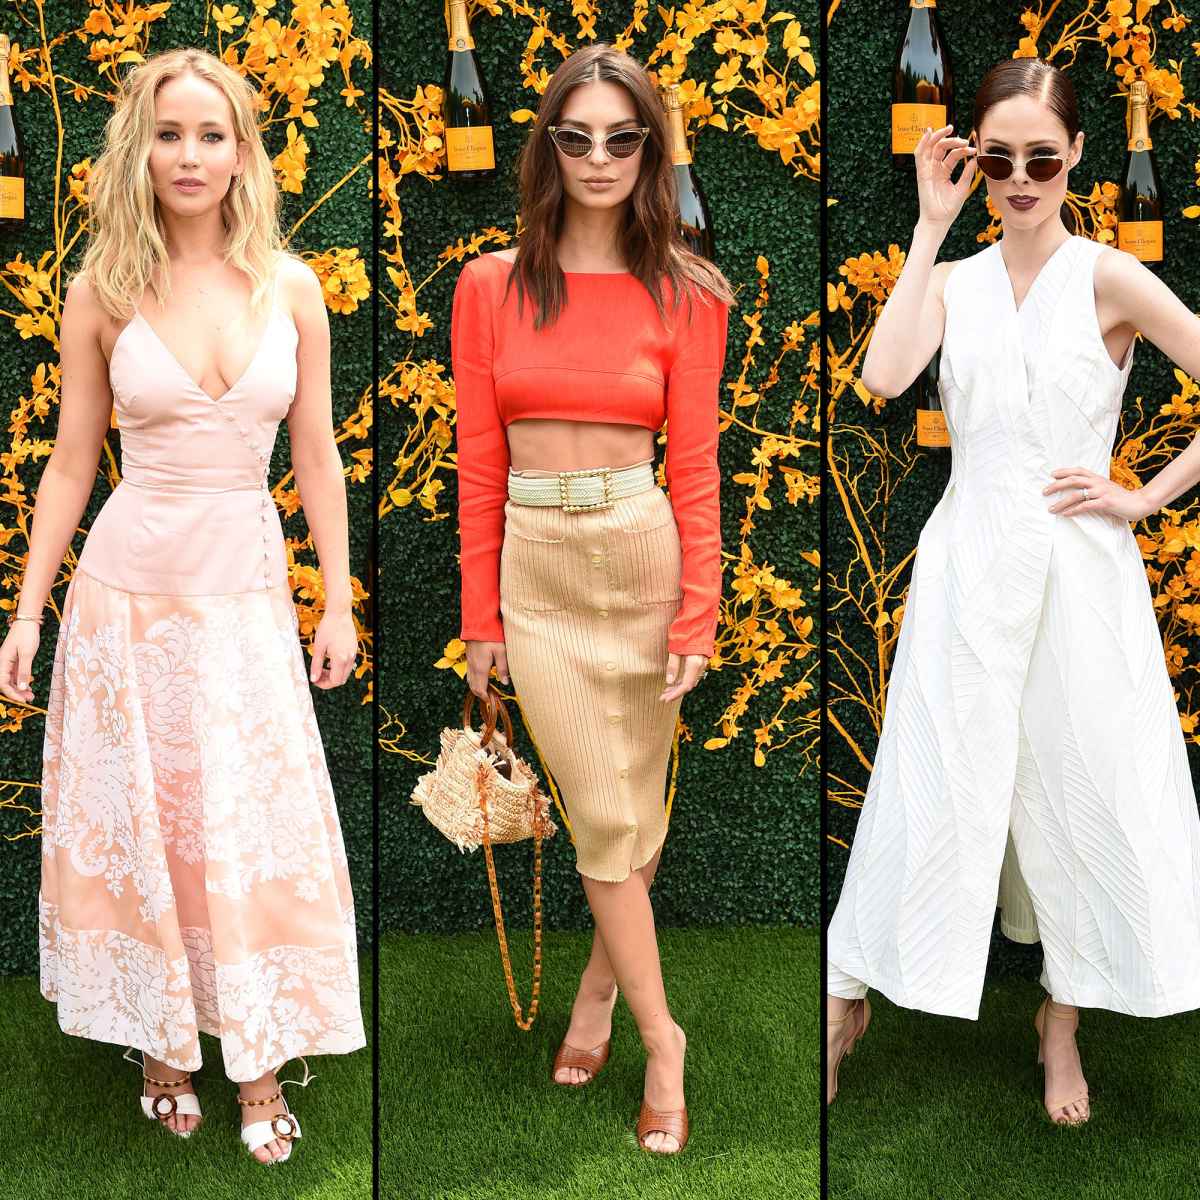 Party Like an A-Lister at Next Month's Stylish Veuve Clicquot Polo